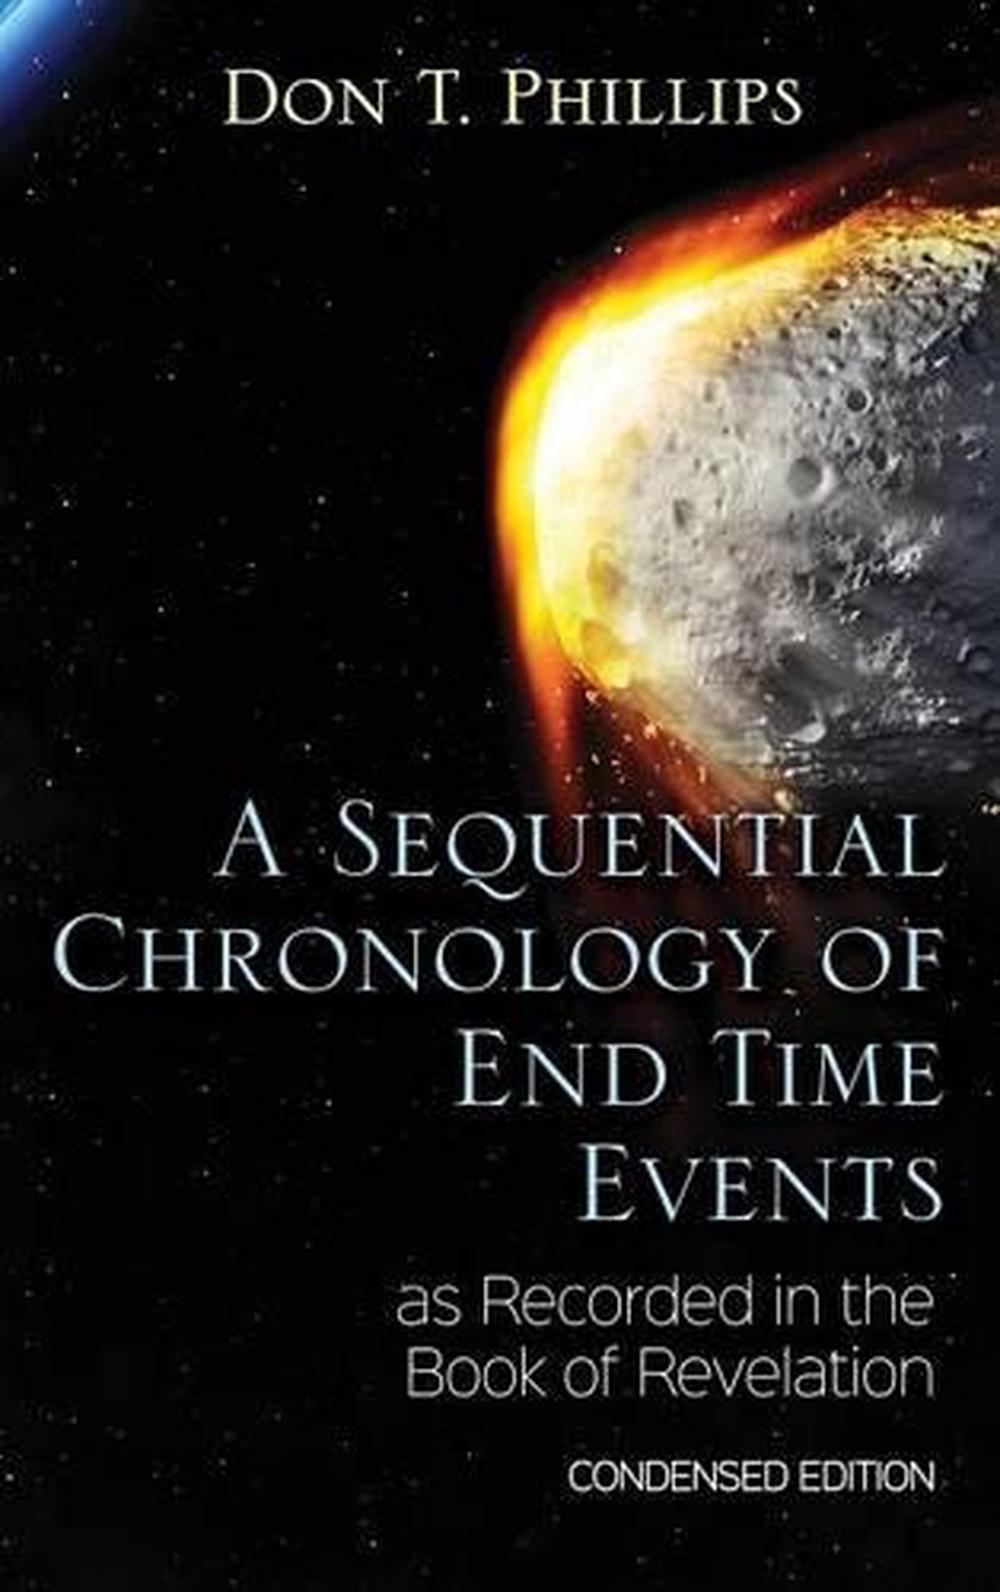 A Sequential Chronology Of End Time Events as Recorded in the Book of